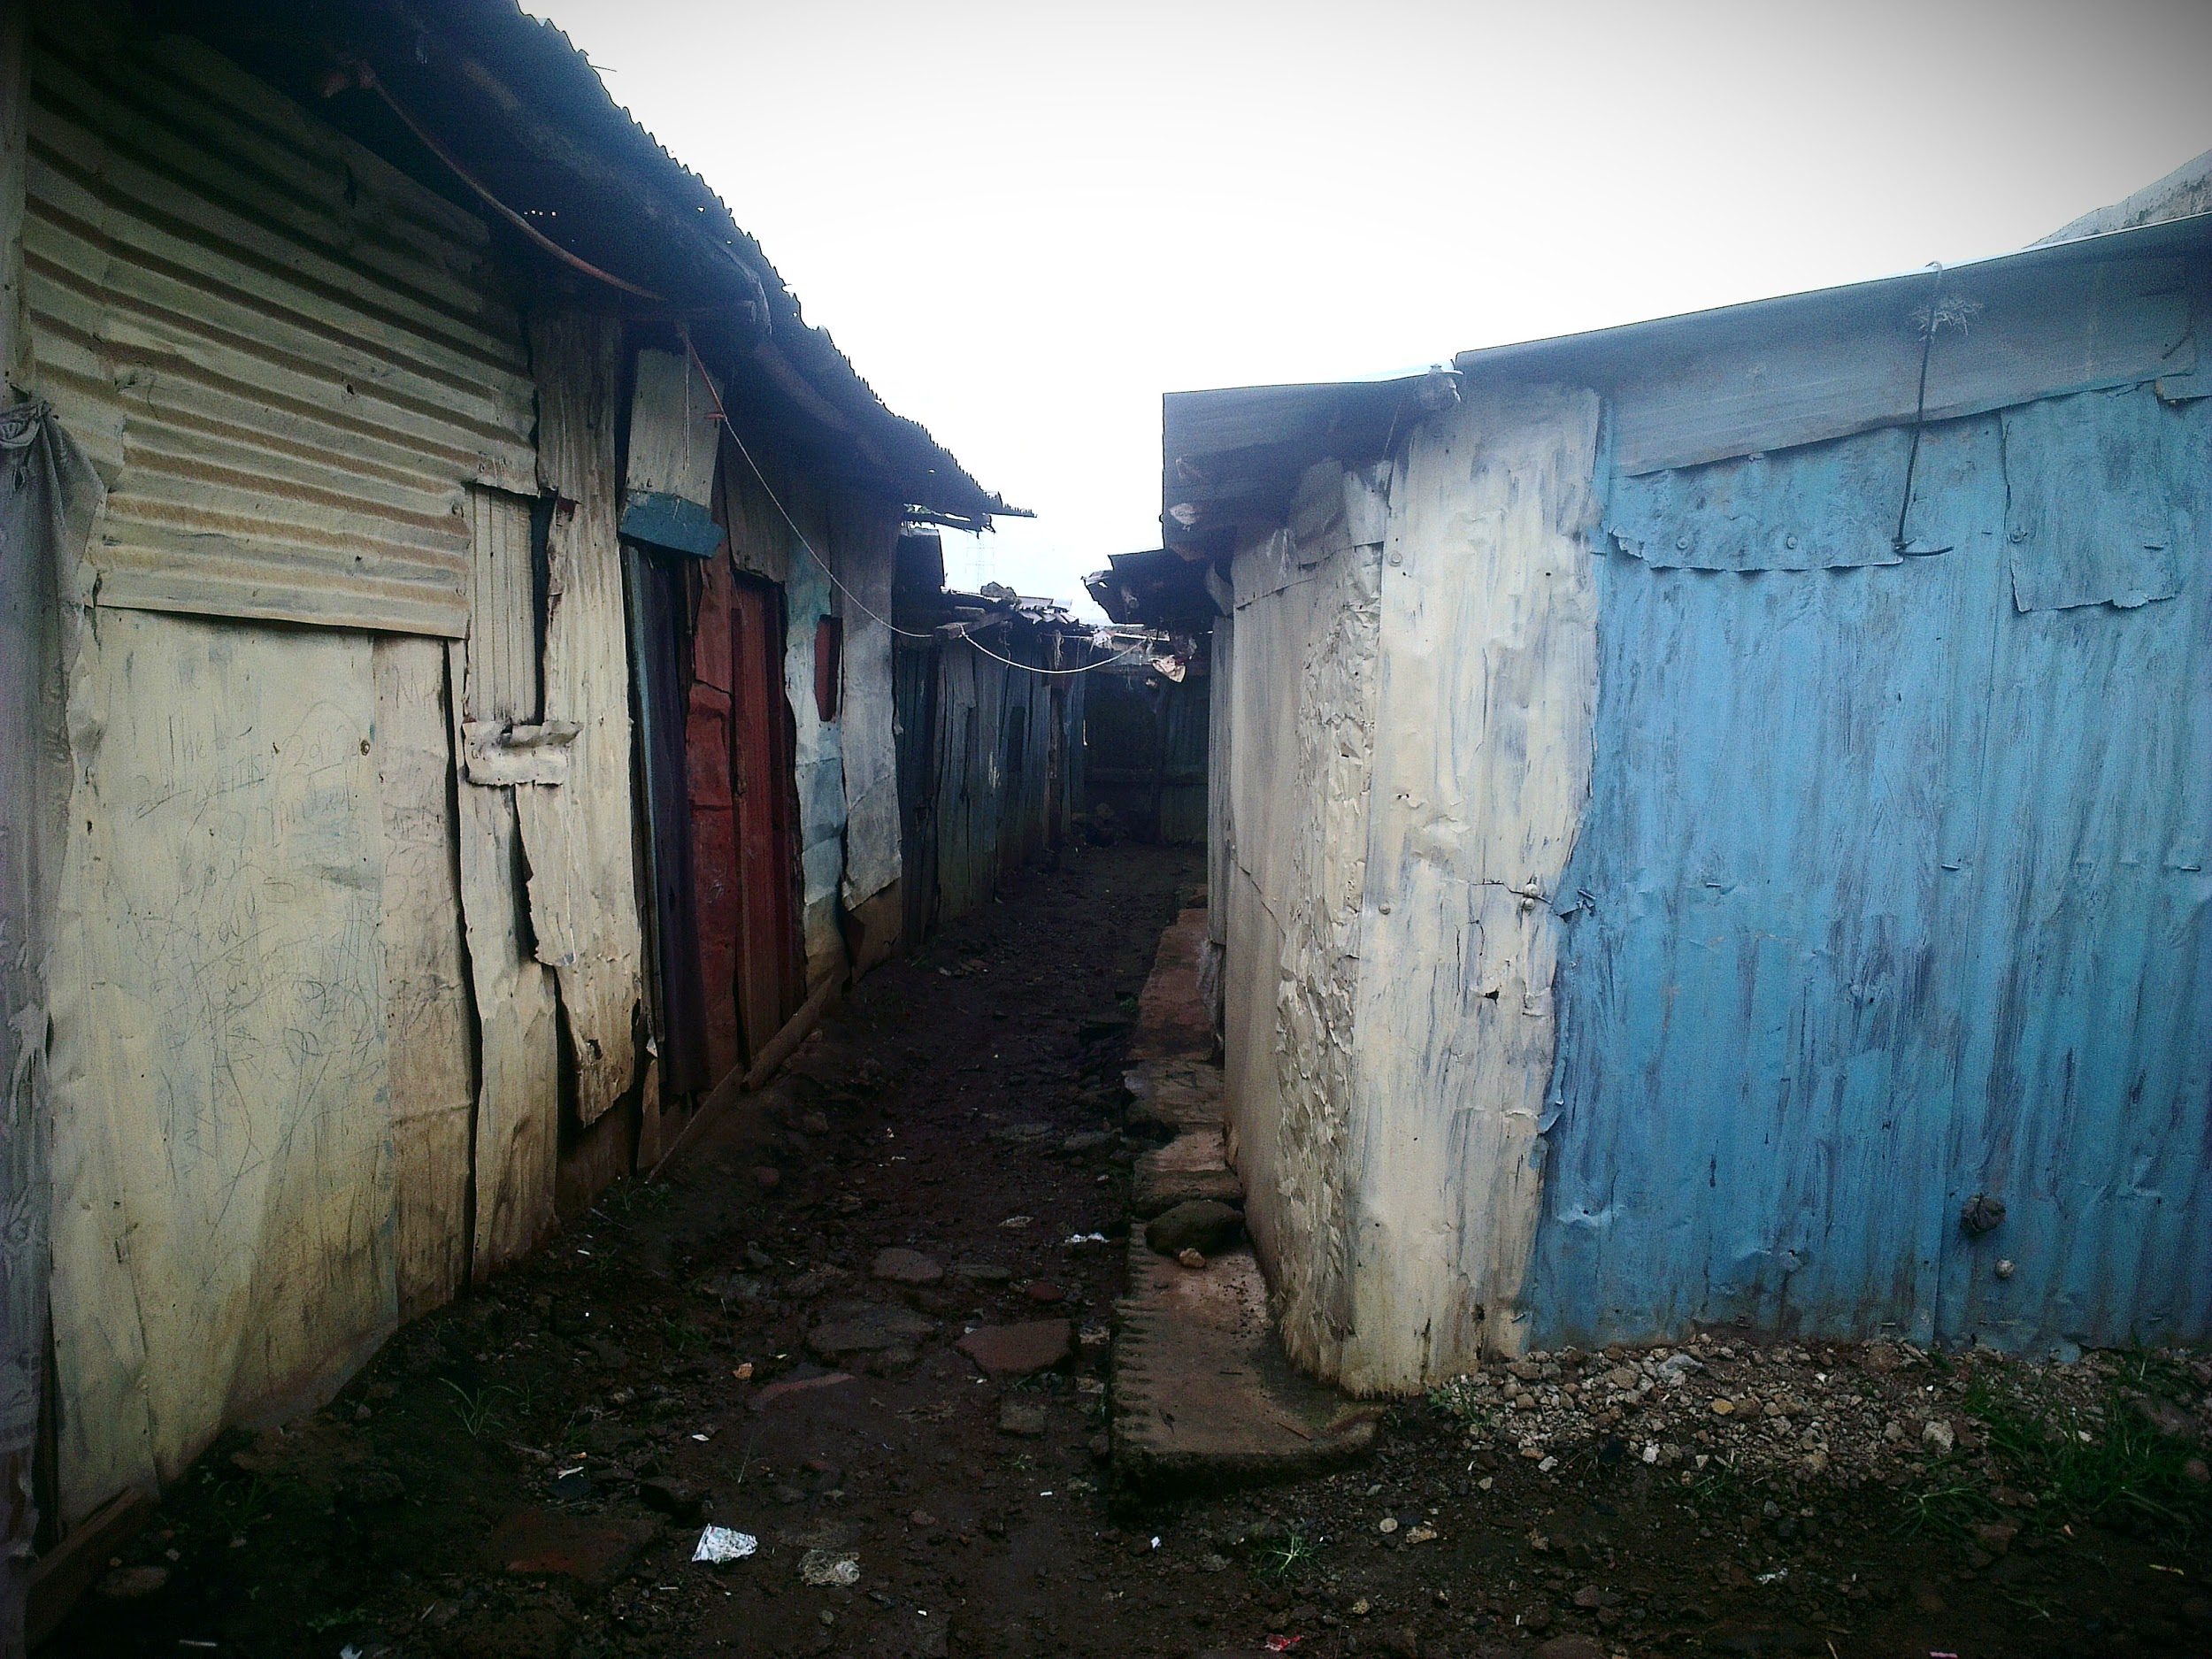 The home of Joseph Muranga, one person who helped us initiating the support structures in Kenia